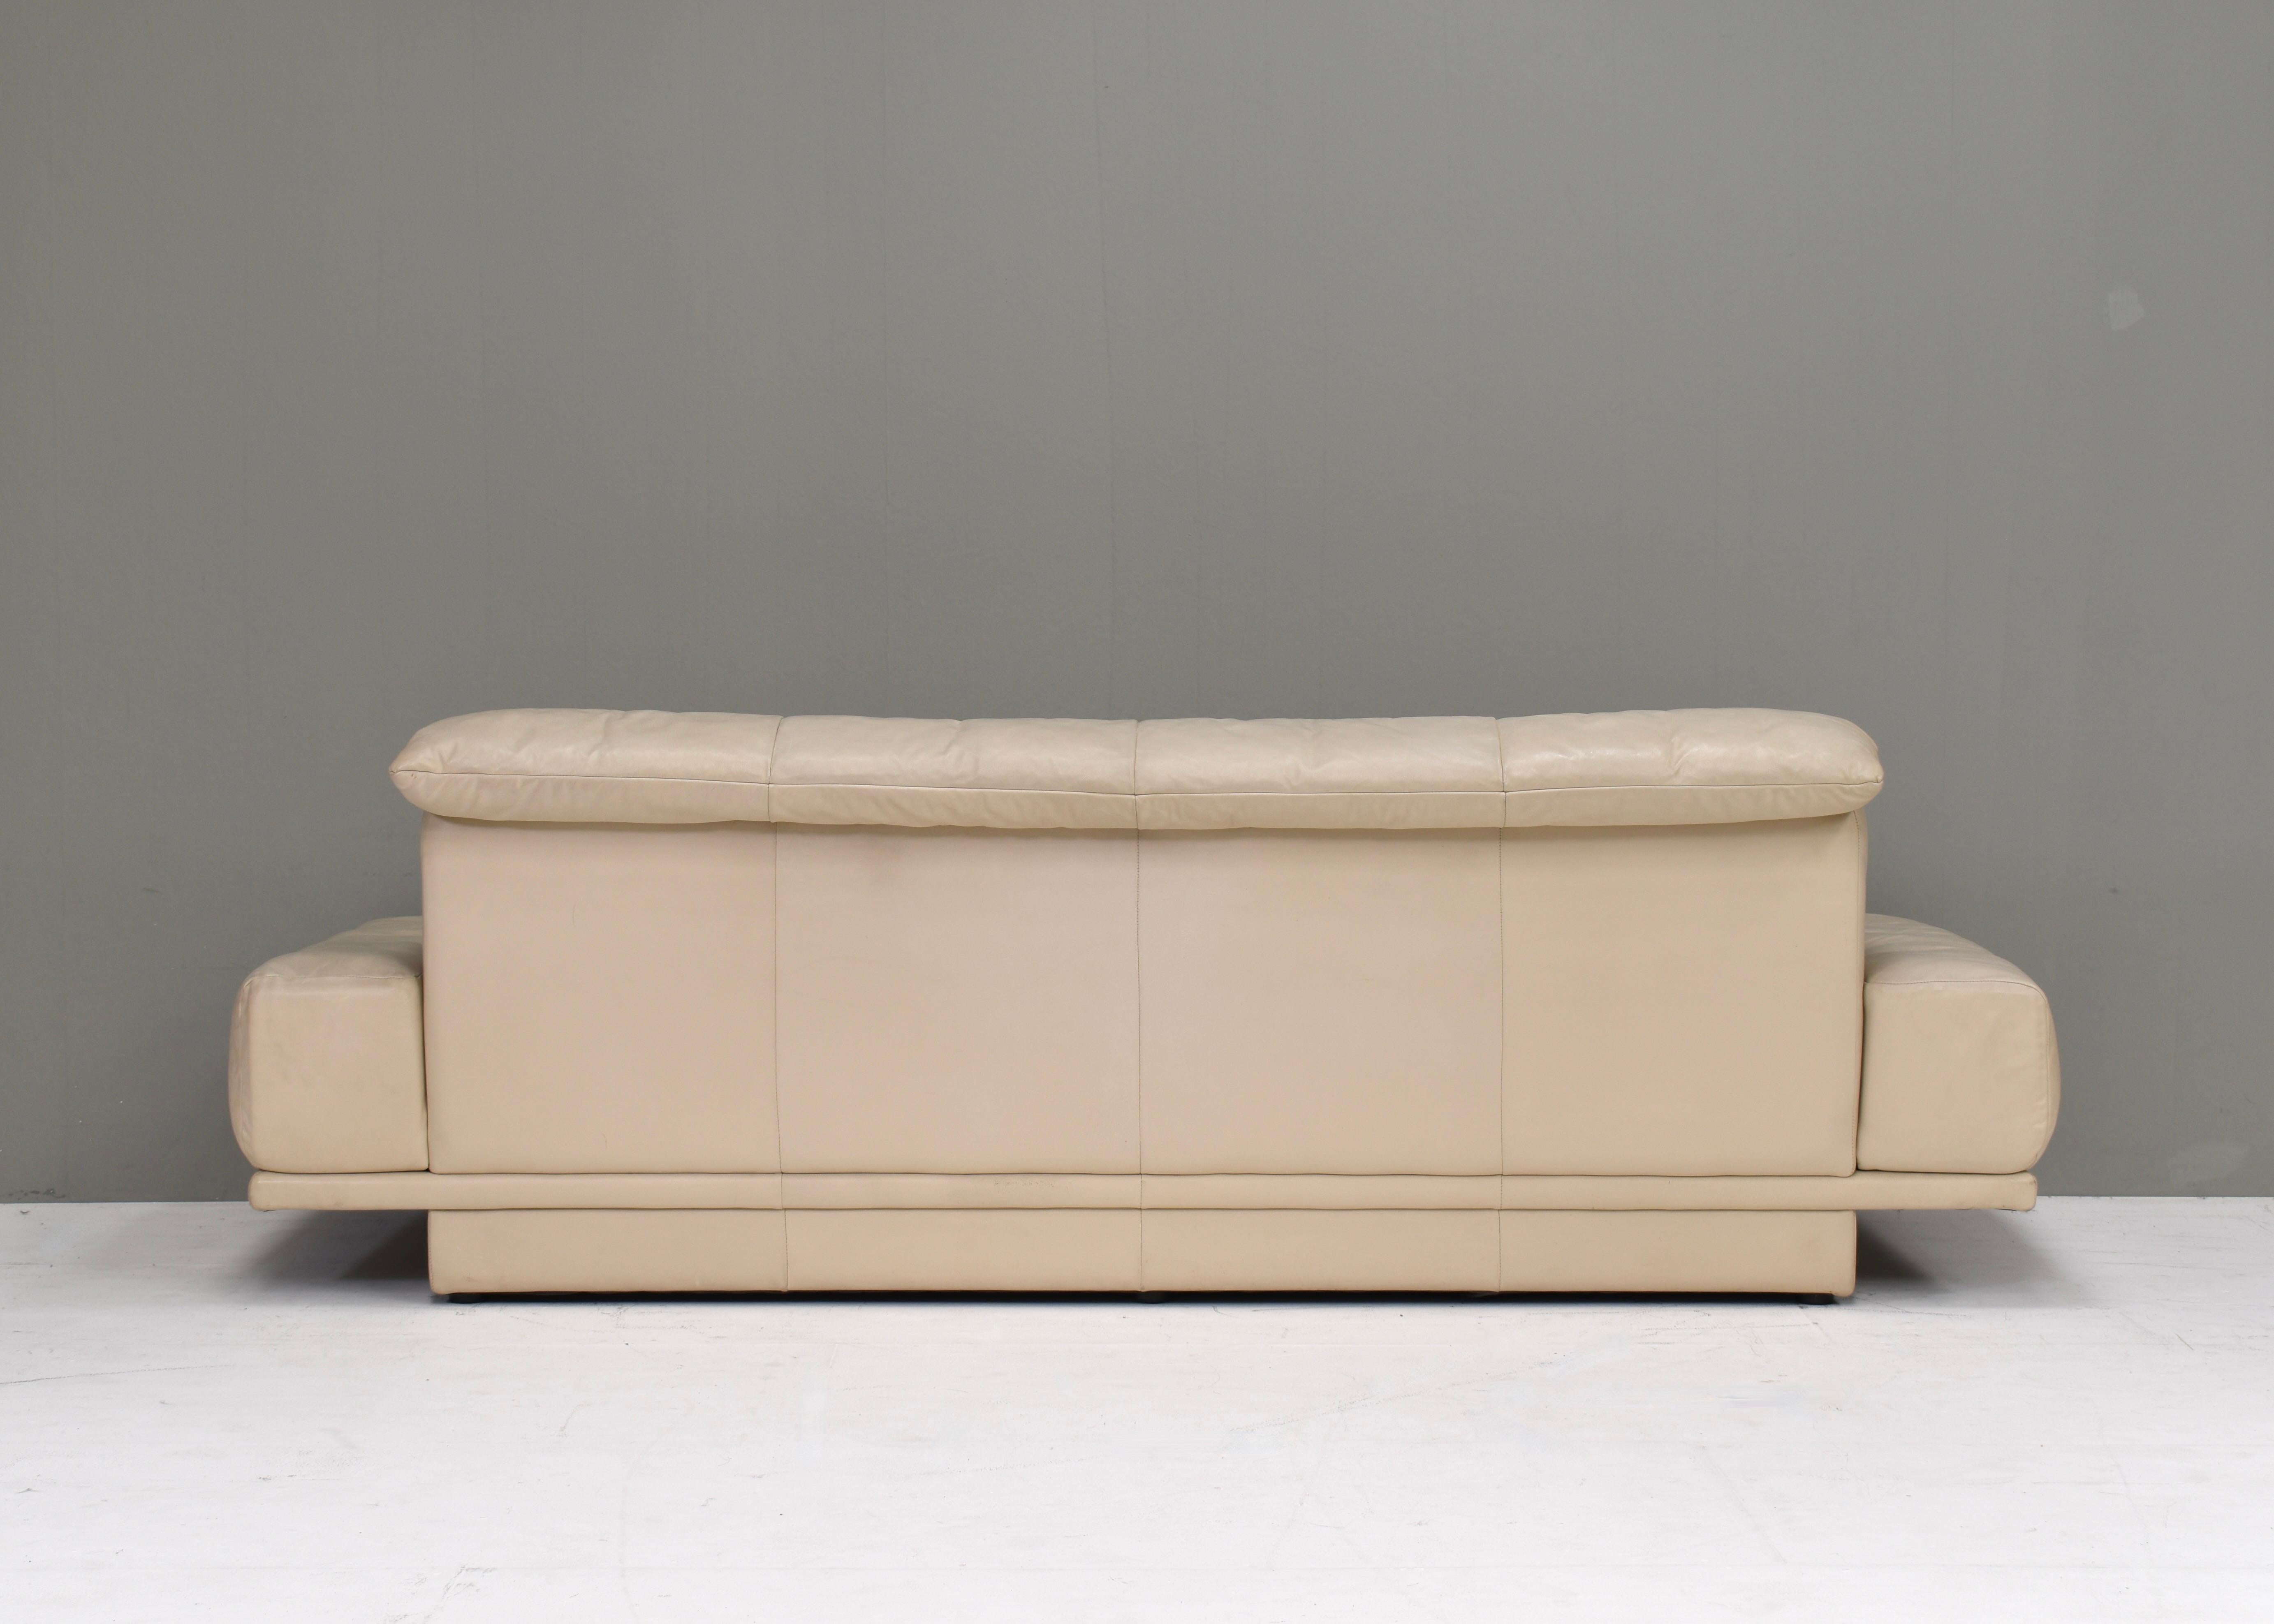 Rolf Benz 3-seat sofa in Ivory Cream Leather – Germany, circa 1980-1990 For Sale 2